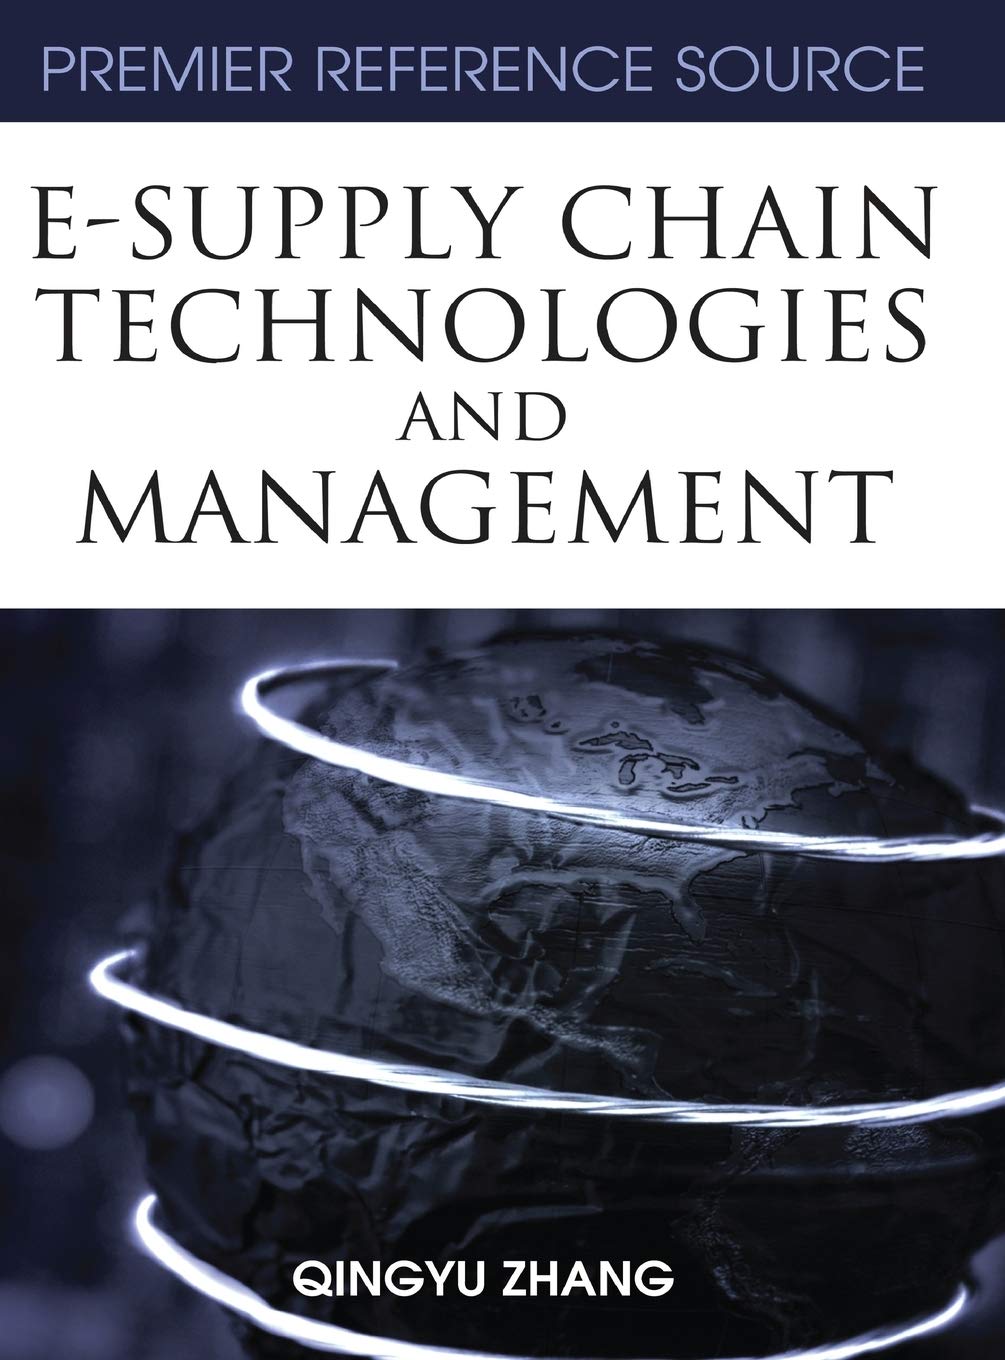 E-supply chain technologies and management